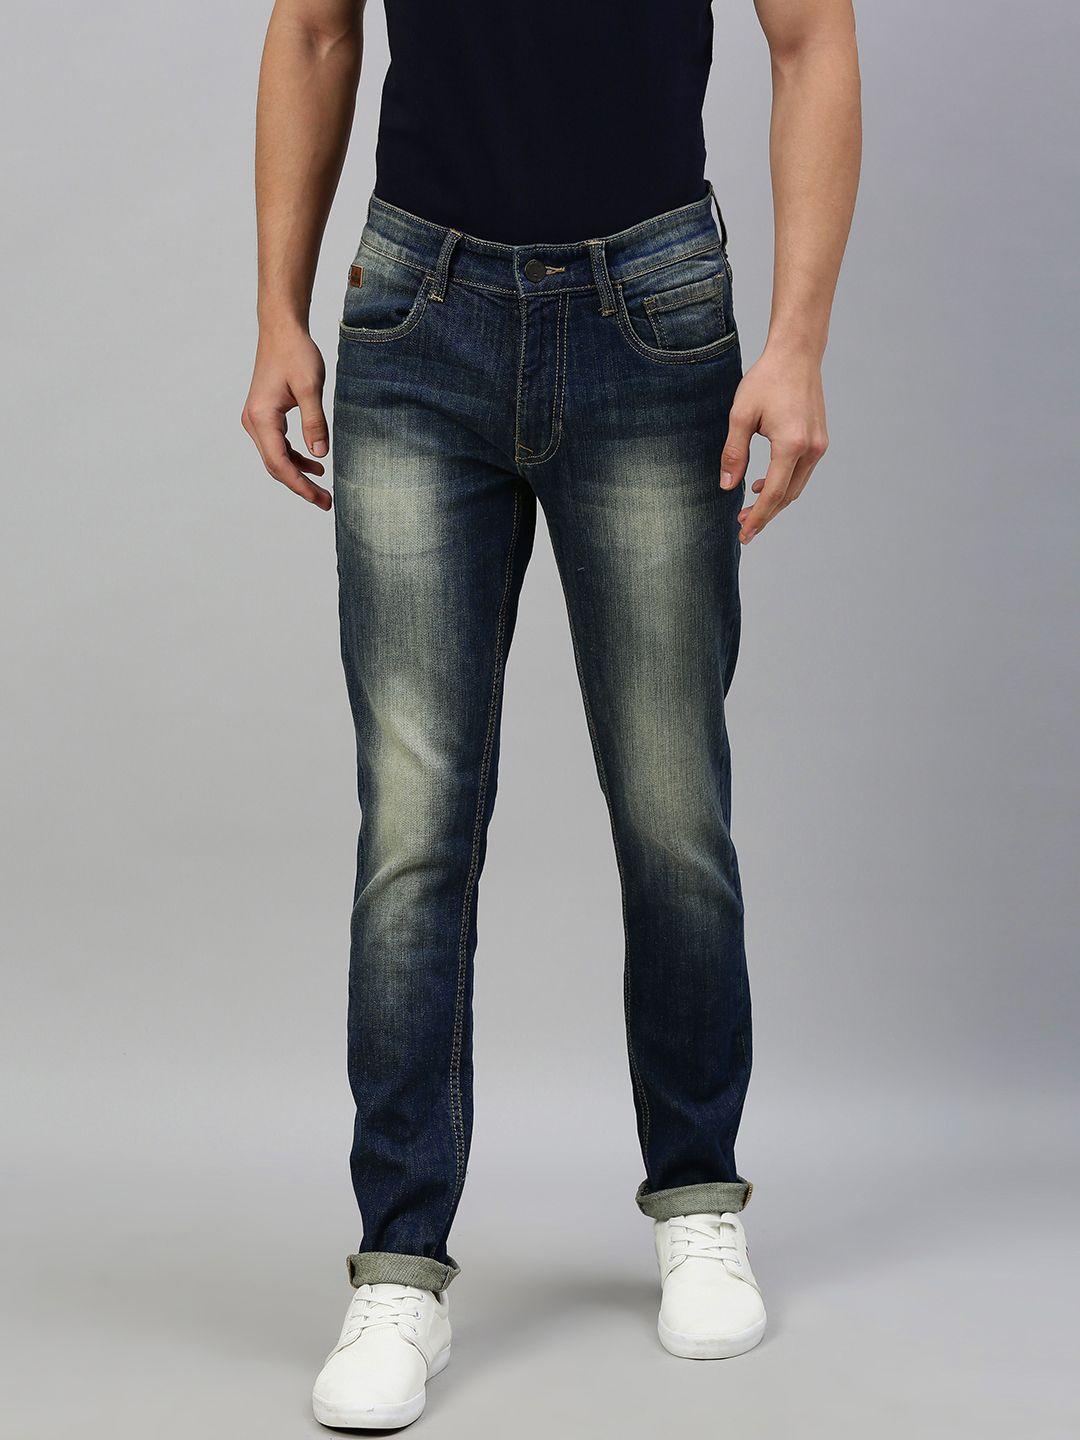 wrogn-men-blue-skinny-fit-mid-rise-clean-look-stretchable-jeans